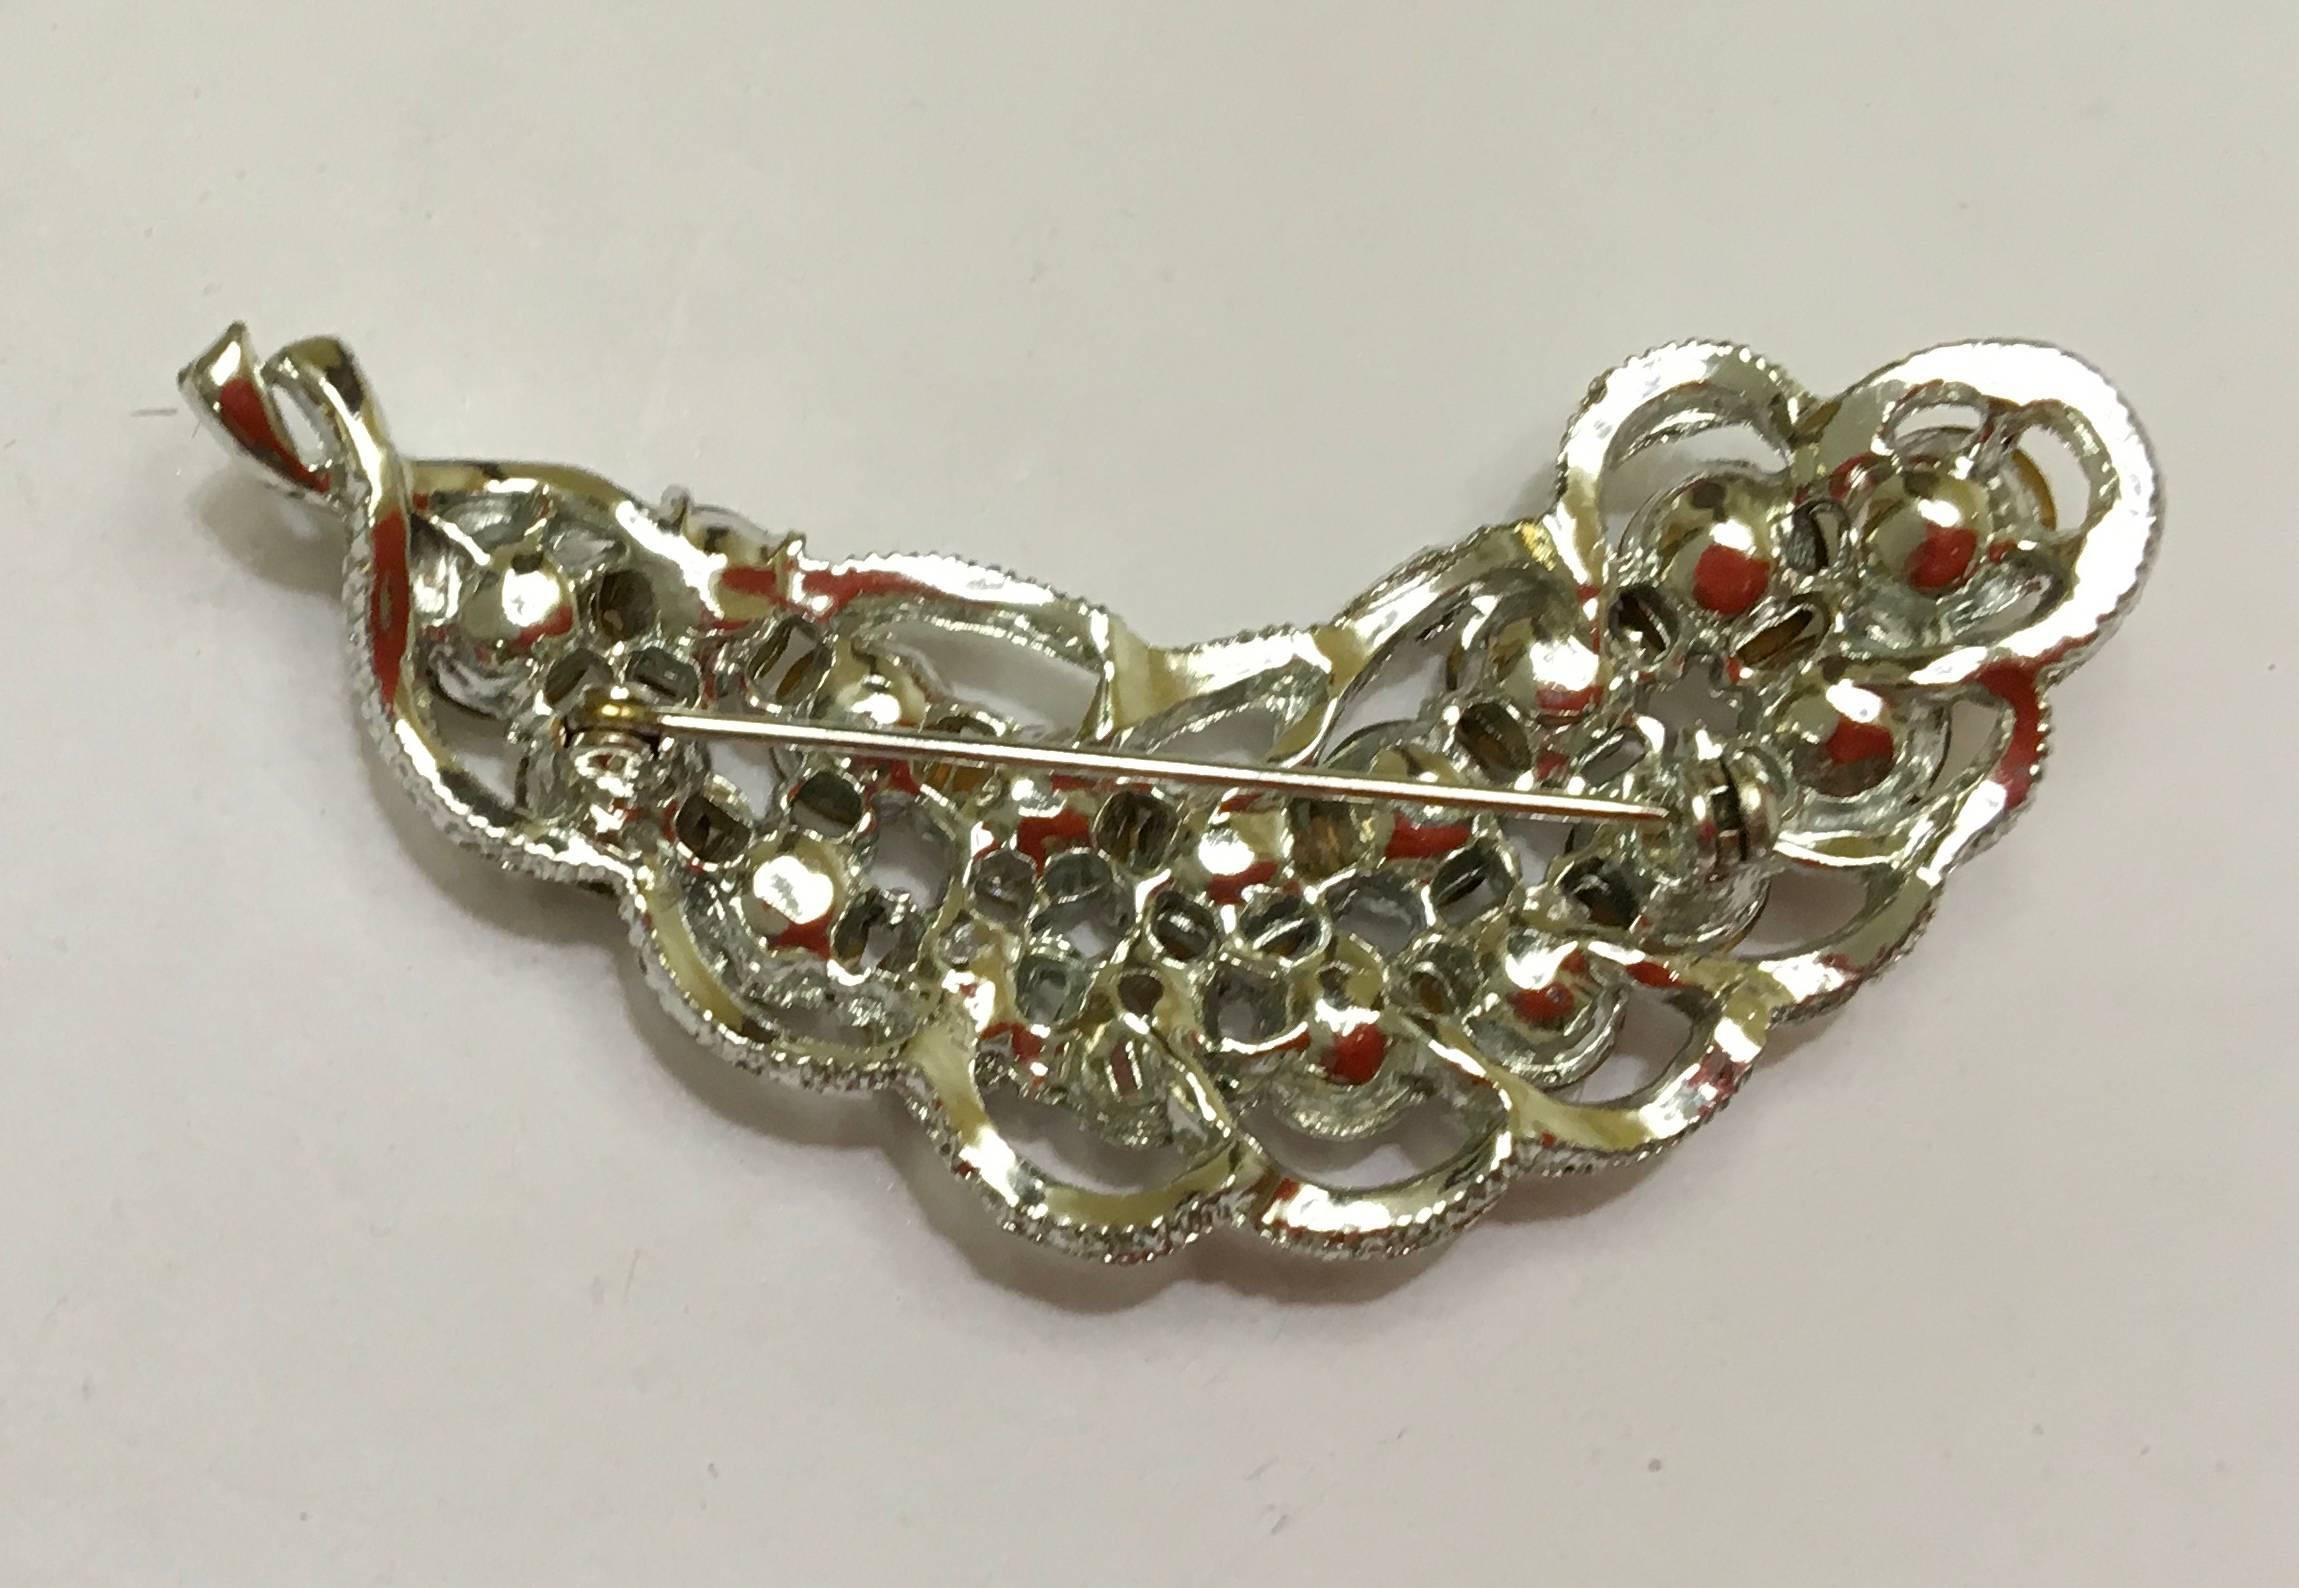 Presented here is a beautiful rhinestone brooch from the 1960's. This brooch is adorned with circular rhinestones and has metal filigree around the exterior of the brooch. There is a pin on the back of the brooch that closes with a clasp. A gorgeous